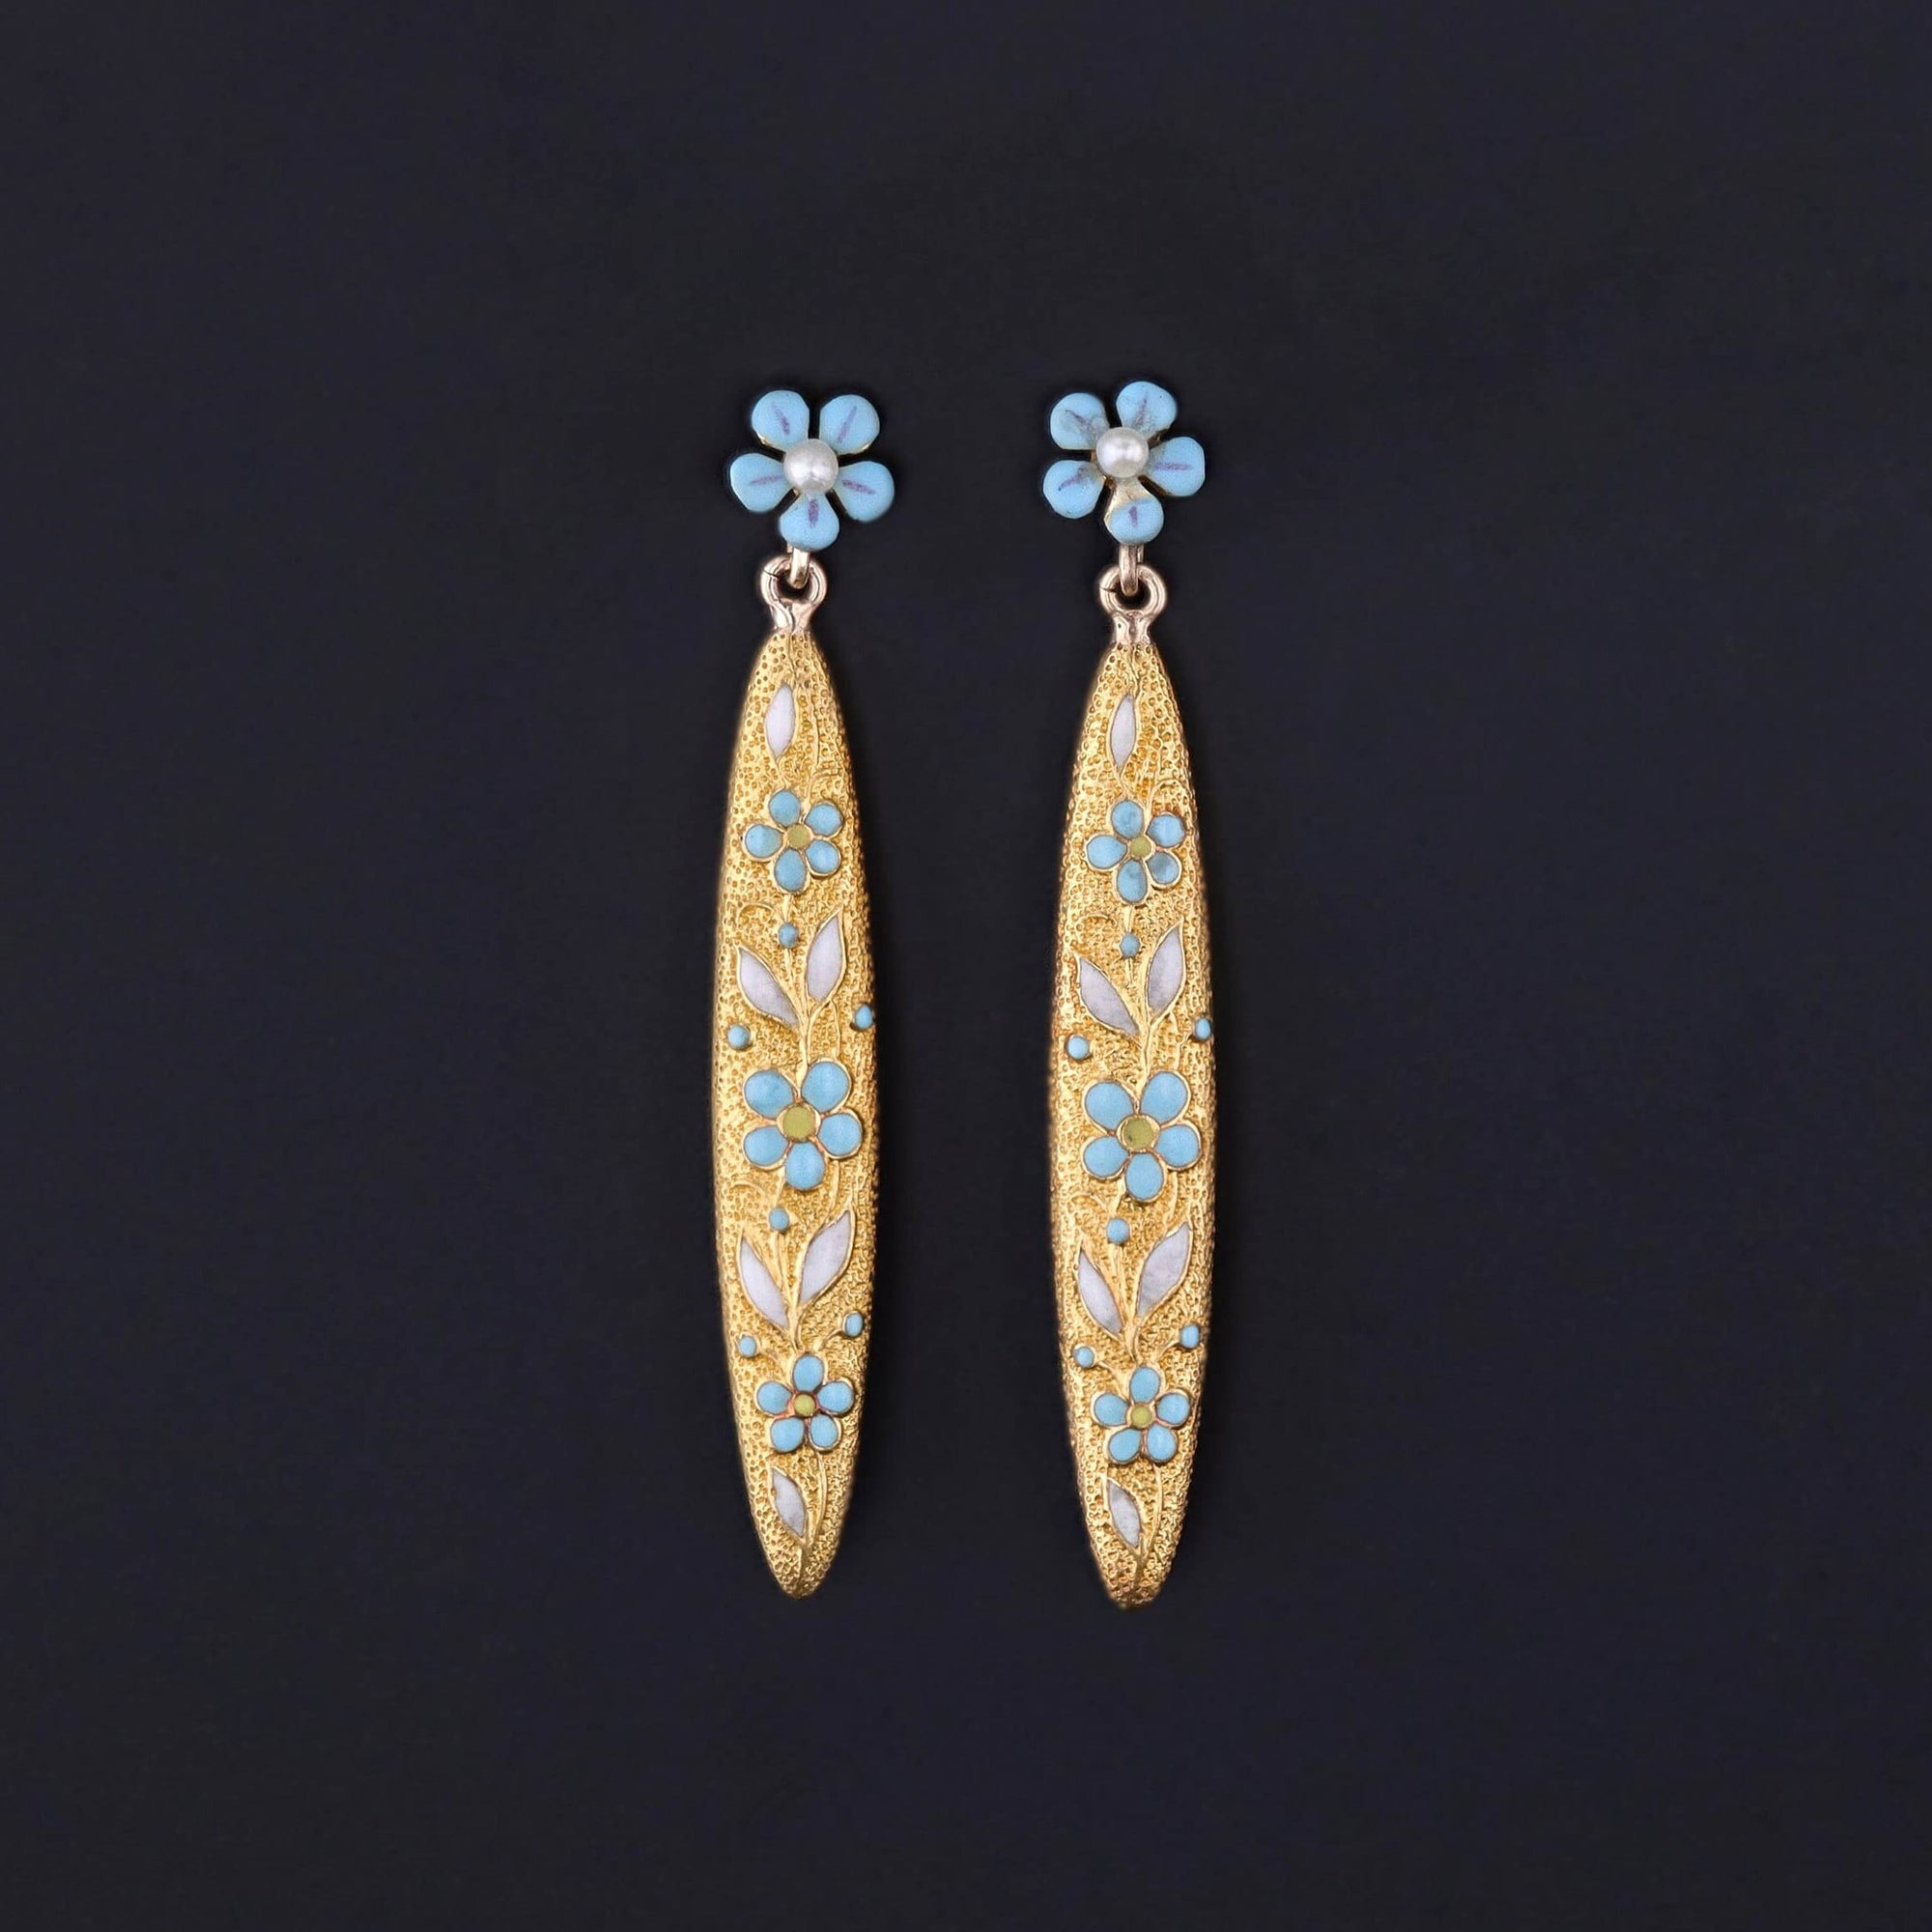 Antique Forget-me-not Flower Earrings of 14k Gold